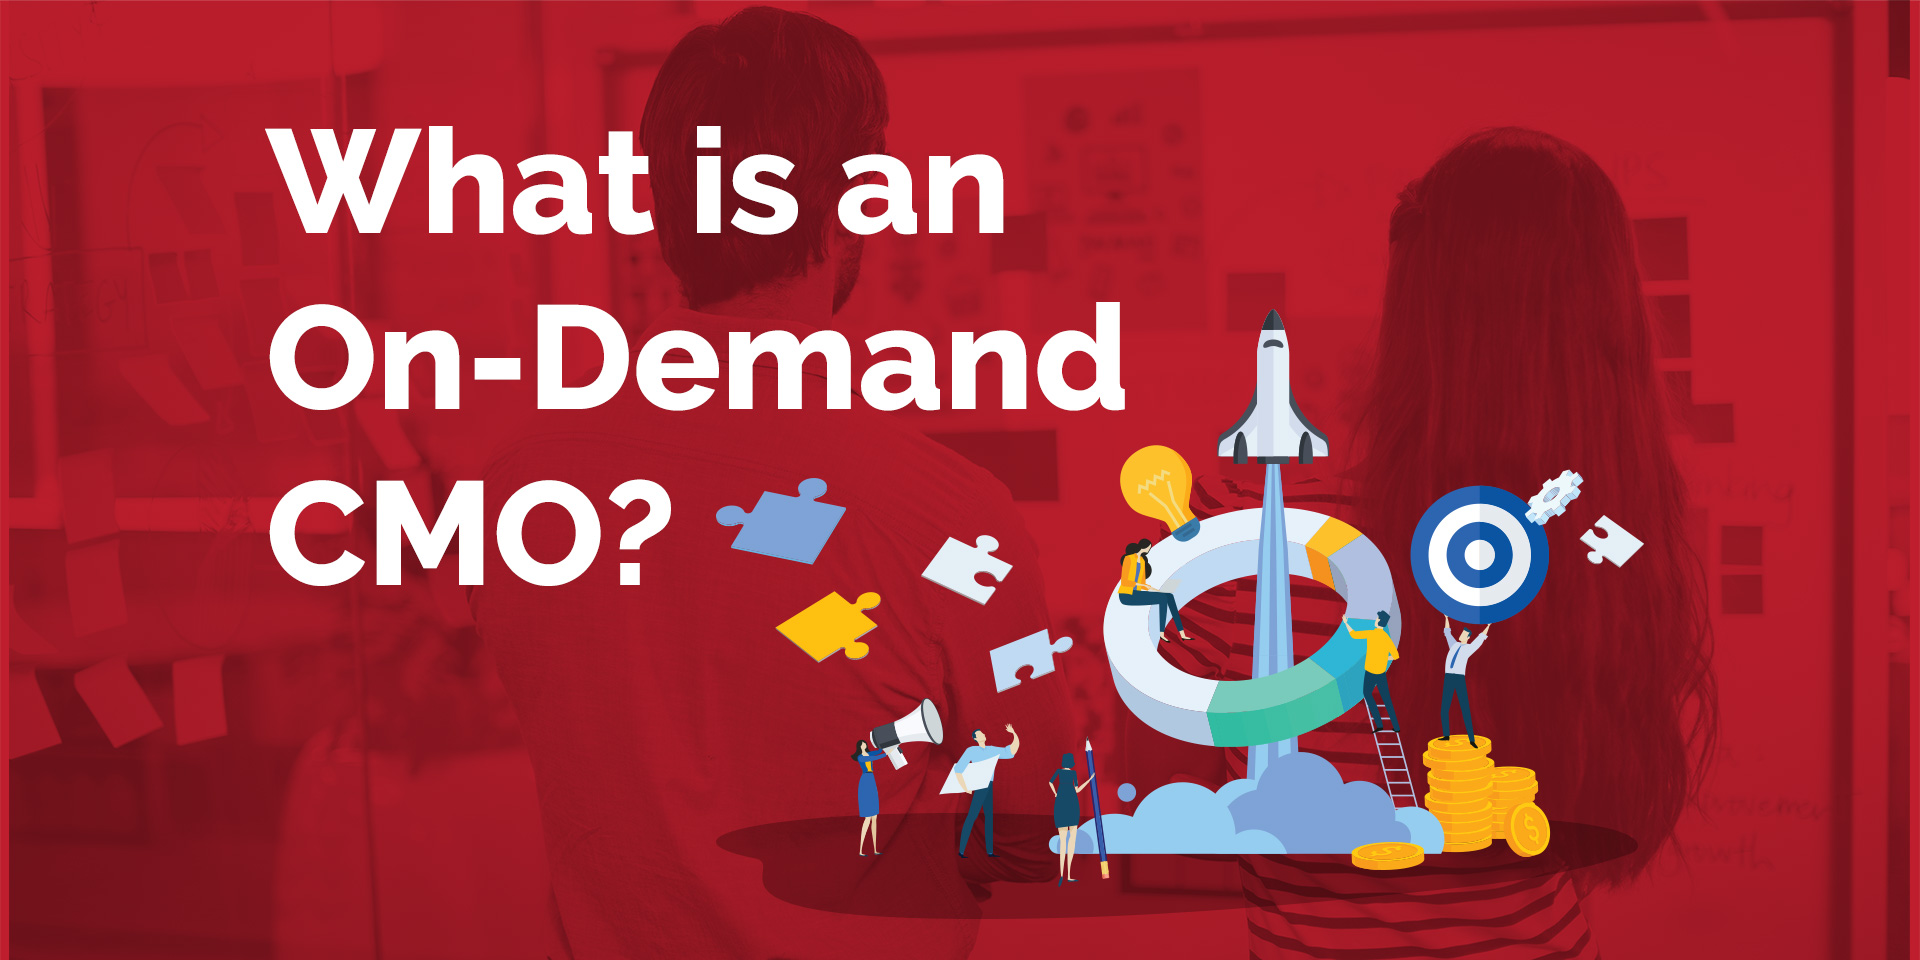 What is an On Demand CMO? MIami, Florida